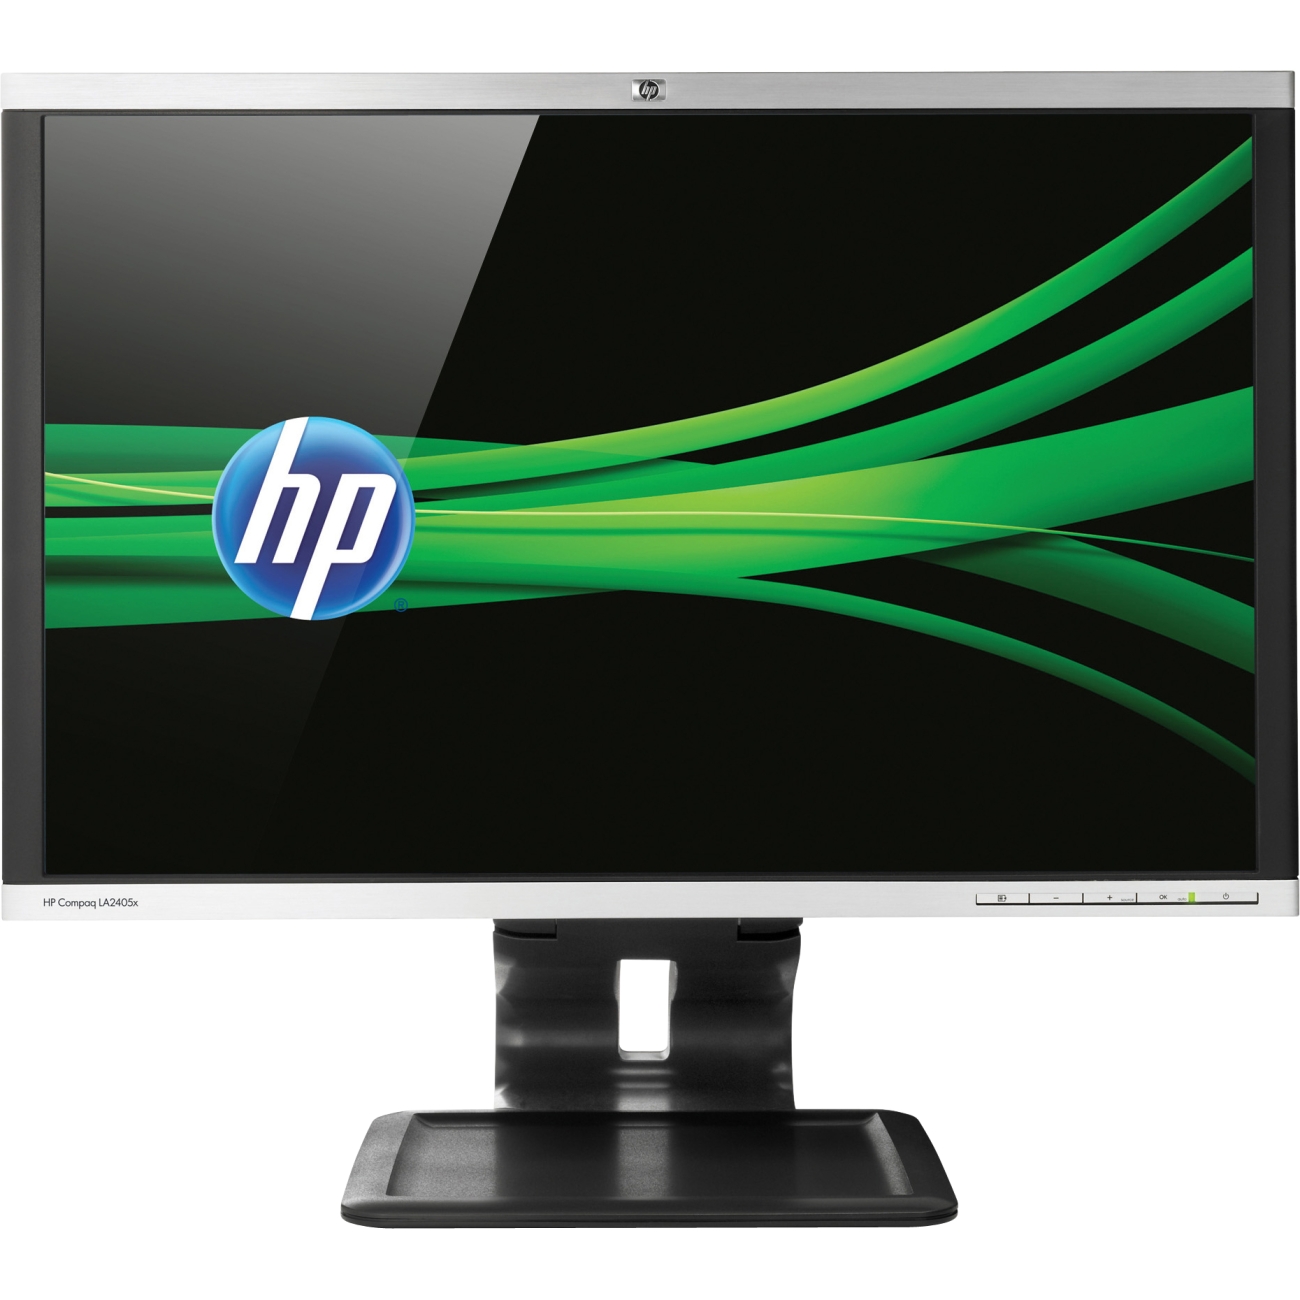 HP W2072a Black 20" 5ms  Widescreen LED Backlit LCD Monitor 200 cd/m2 3000000:1 (600:1) Built in Speakers